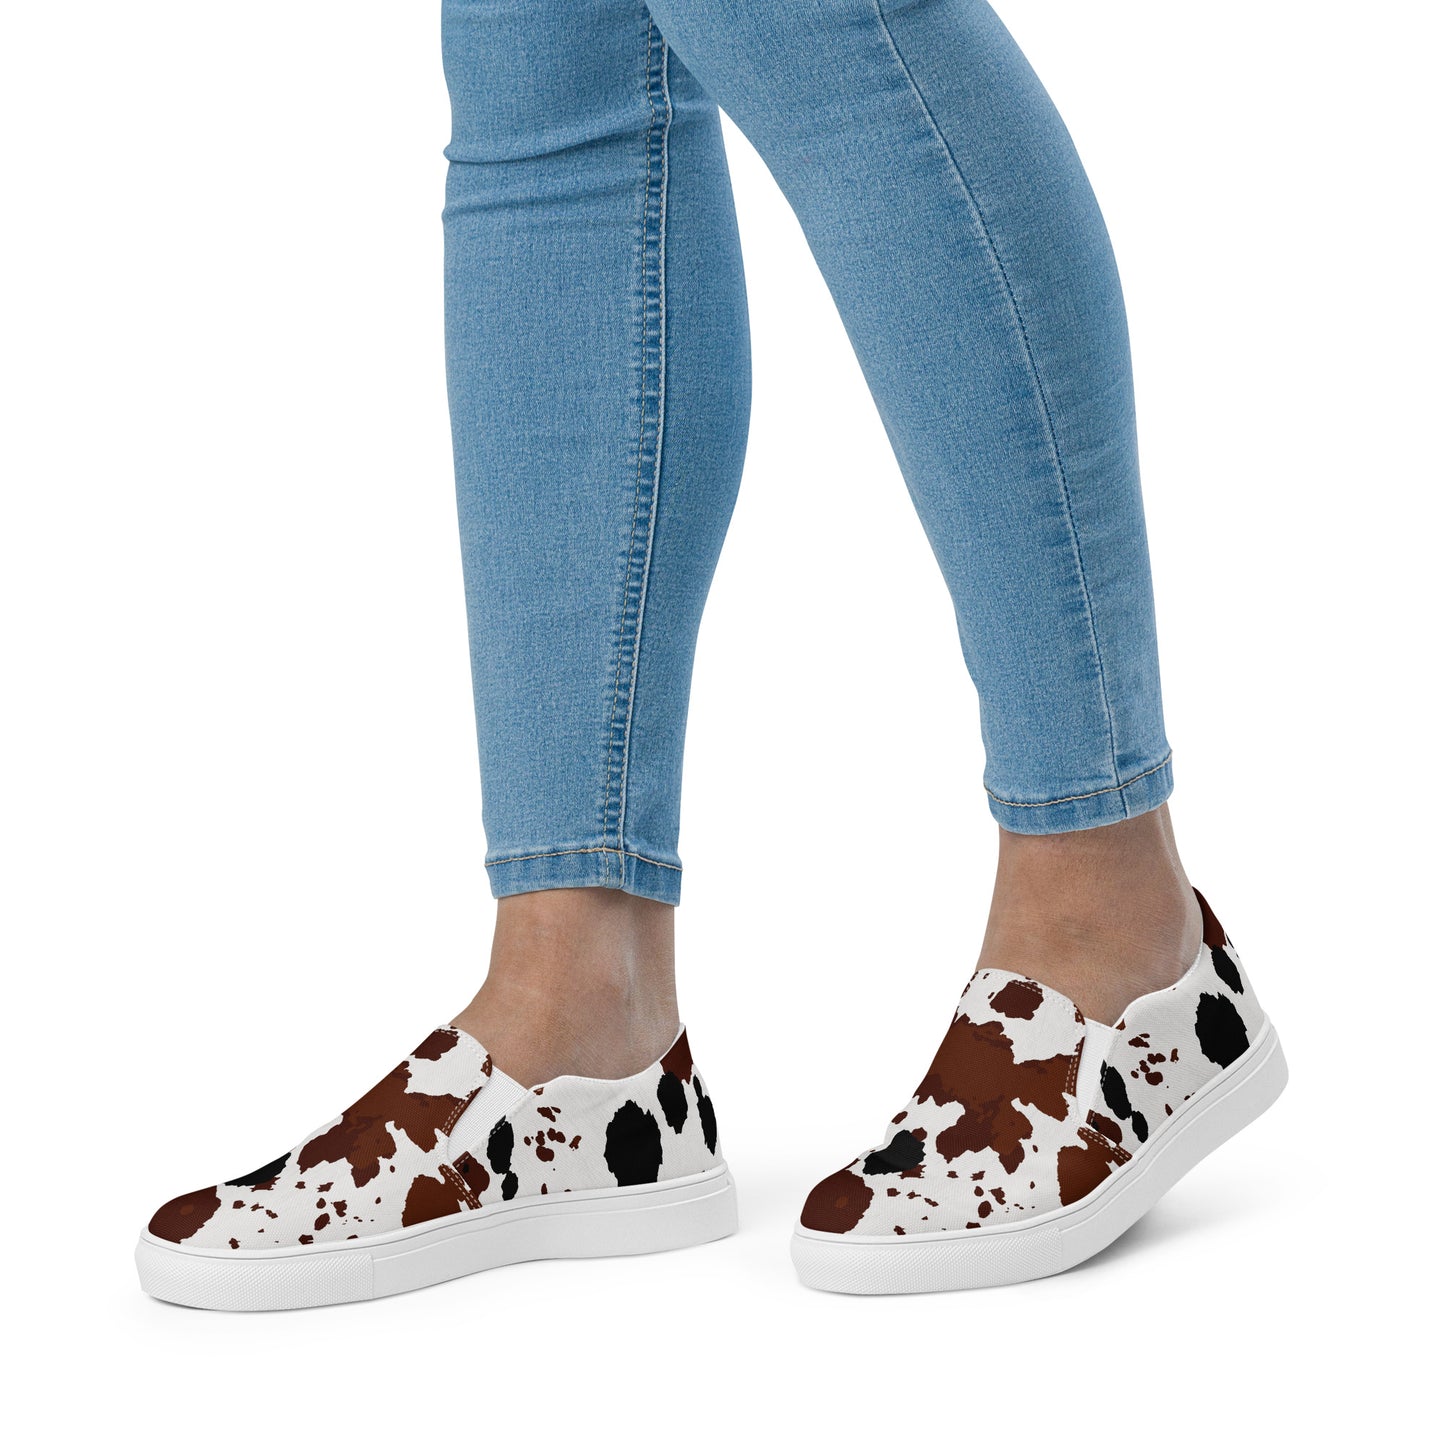 Cow Hide Western Style Women’s slip-on canvas shoes